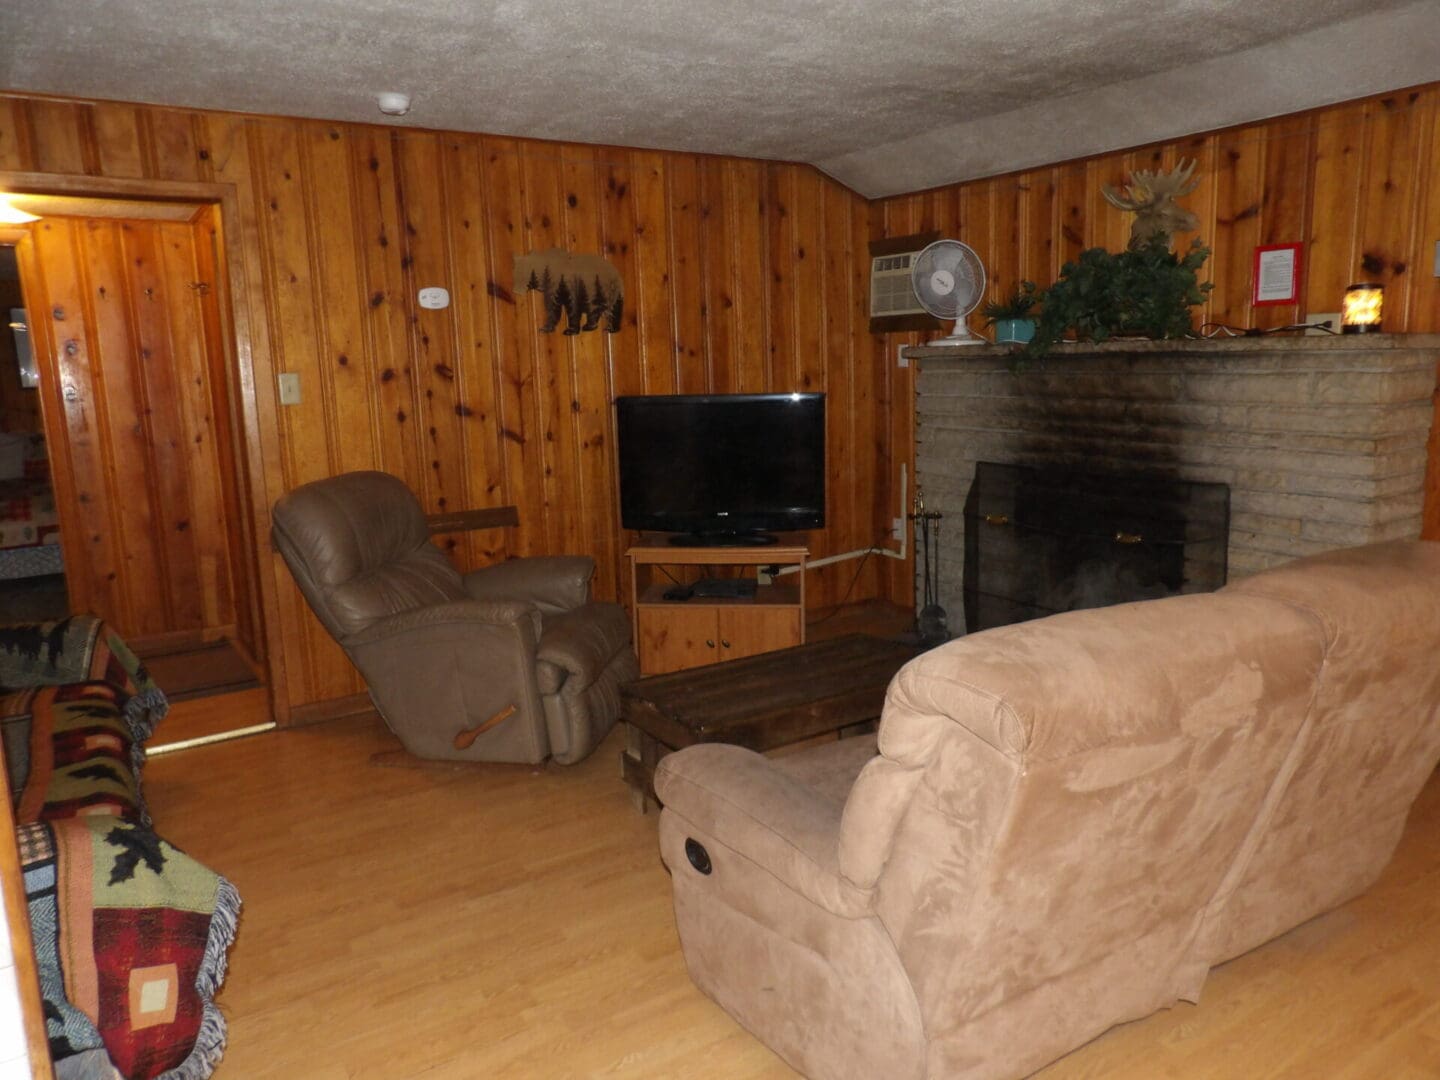 A living room with wood paneling and a fireplace.